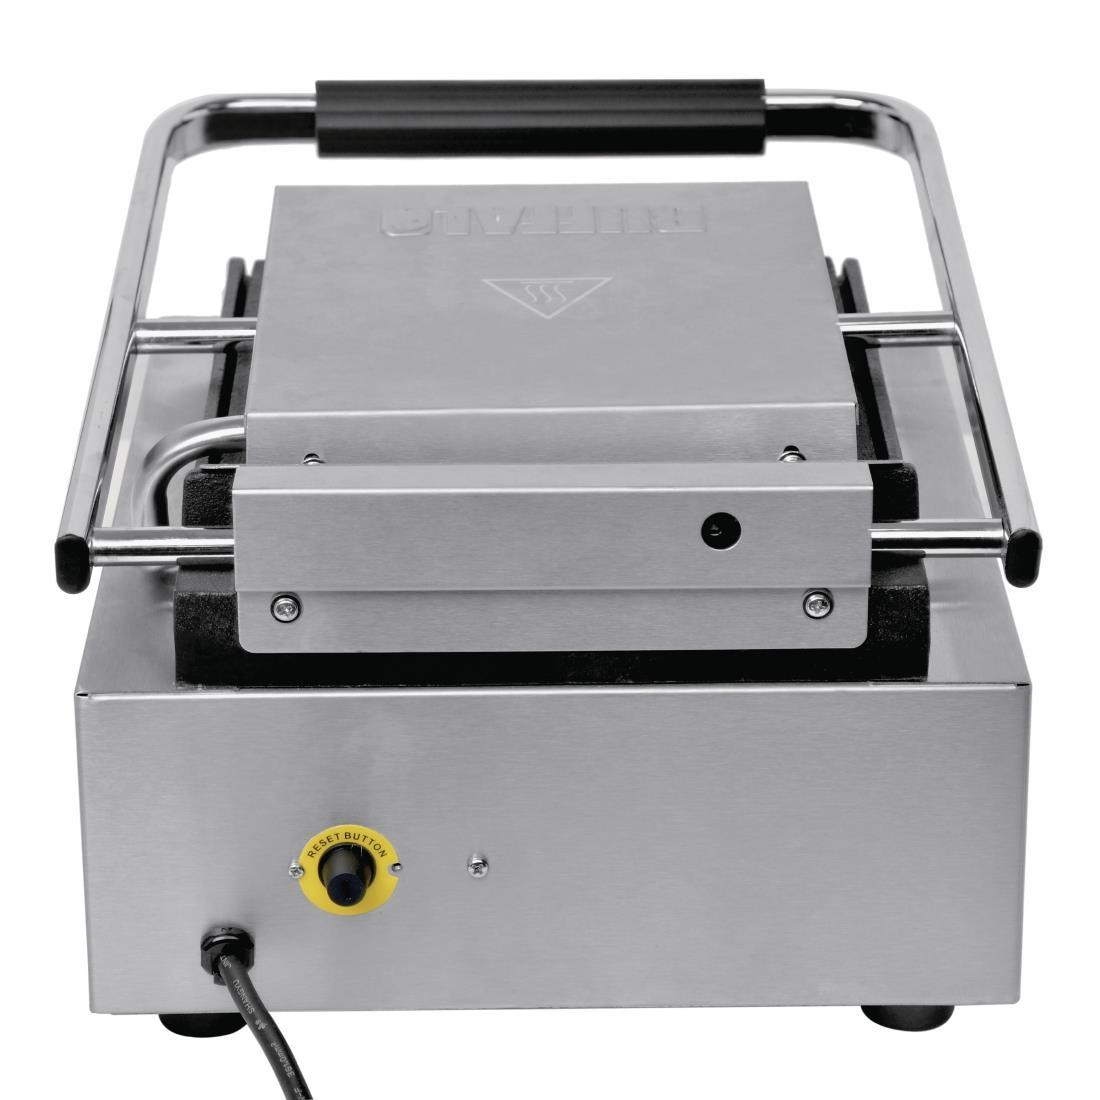 Buffalo Bistro Contact Grill - DY996  - 3